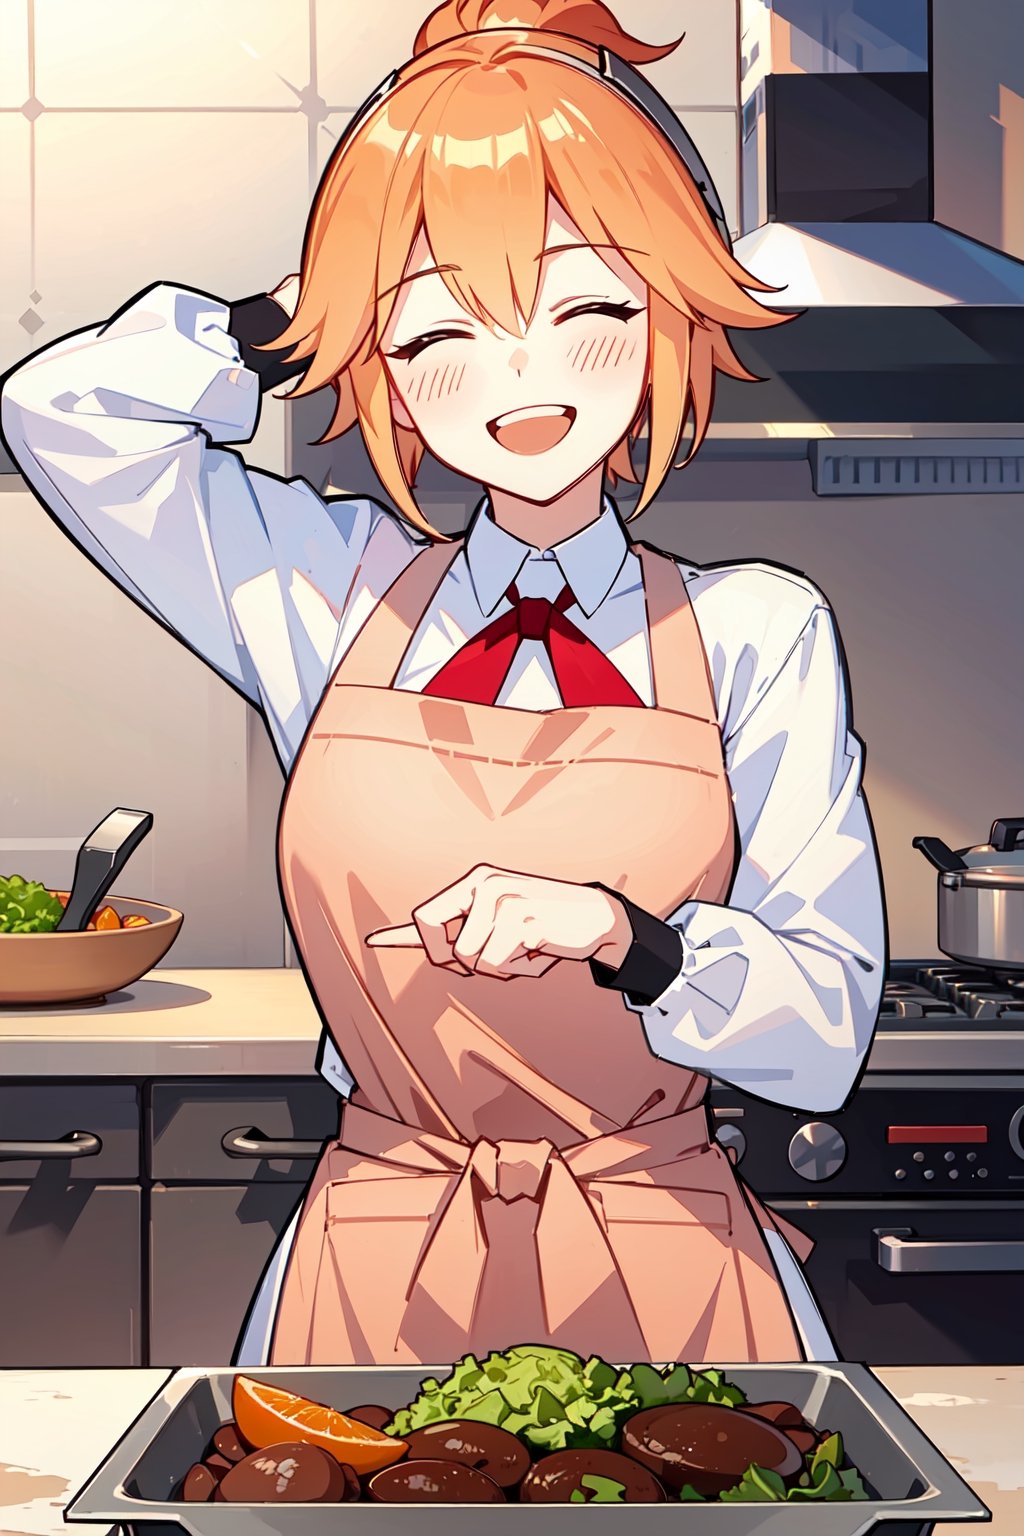 fanny, closed eyes, short ponytail hair, orange hair, upper body, happy, enthusiastic, smiling, grinning, shy, hands on head, white shirt aspirants, slim waist, pink apron, cook food, indoors kitchen, ingredients cooking, kitchen tools, masterpieces.